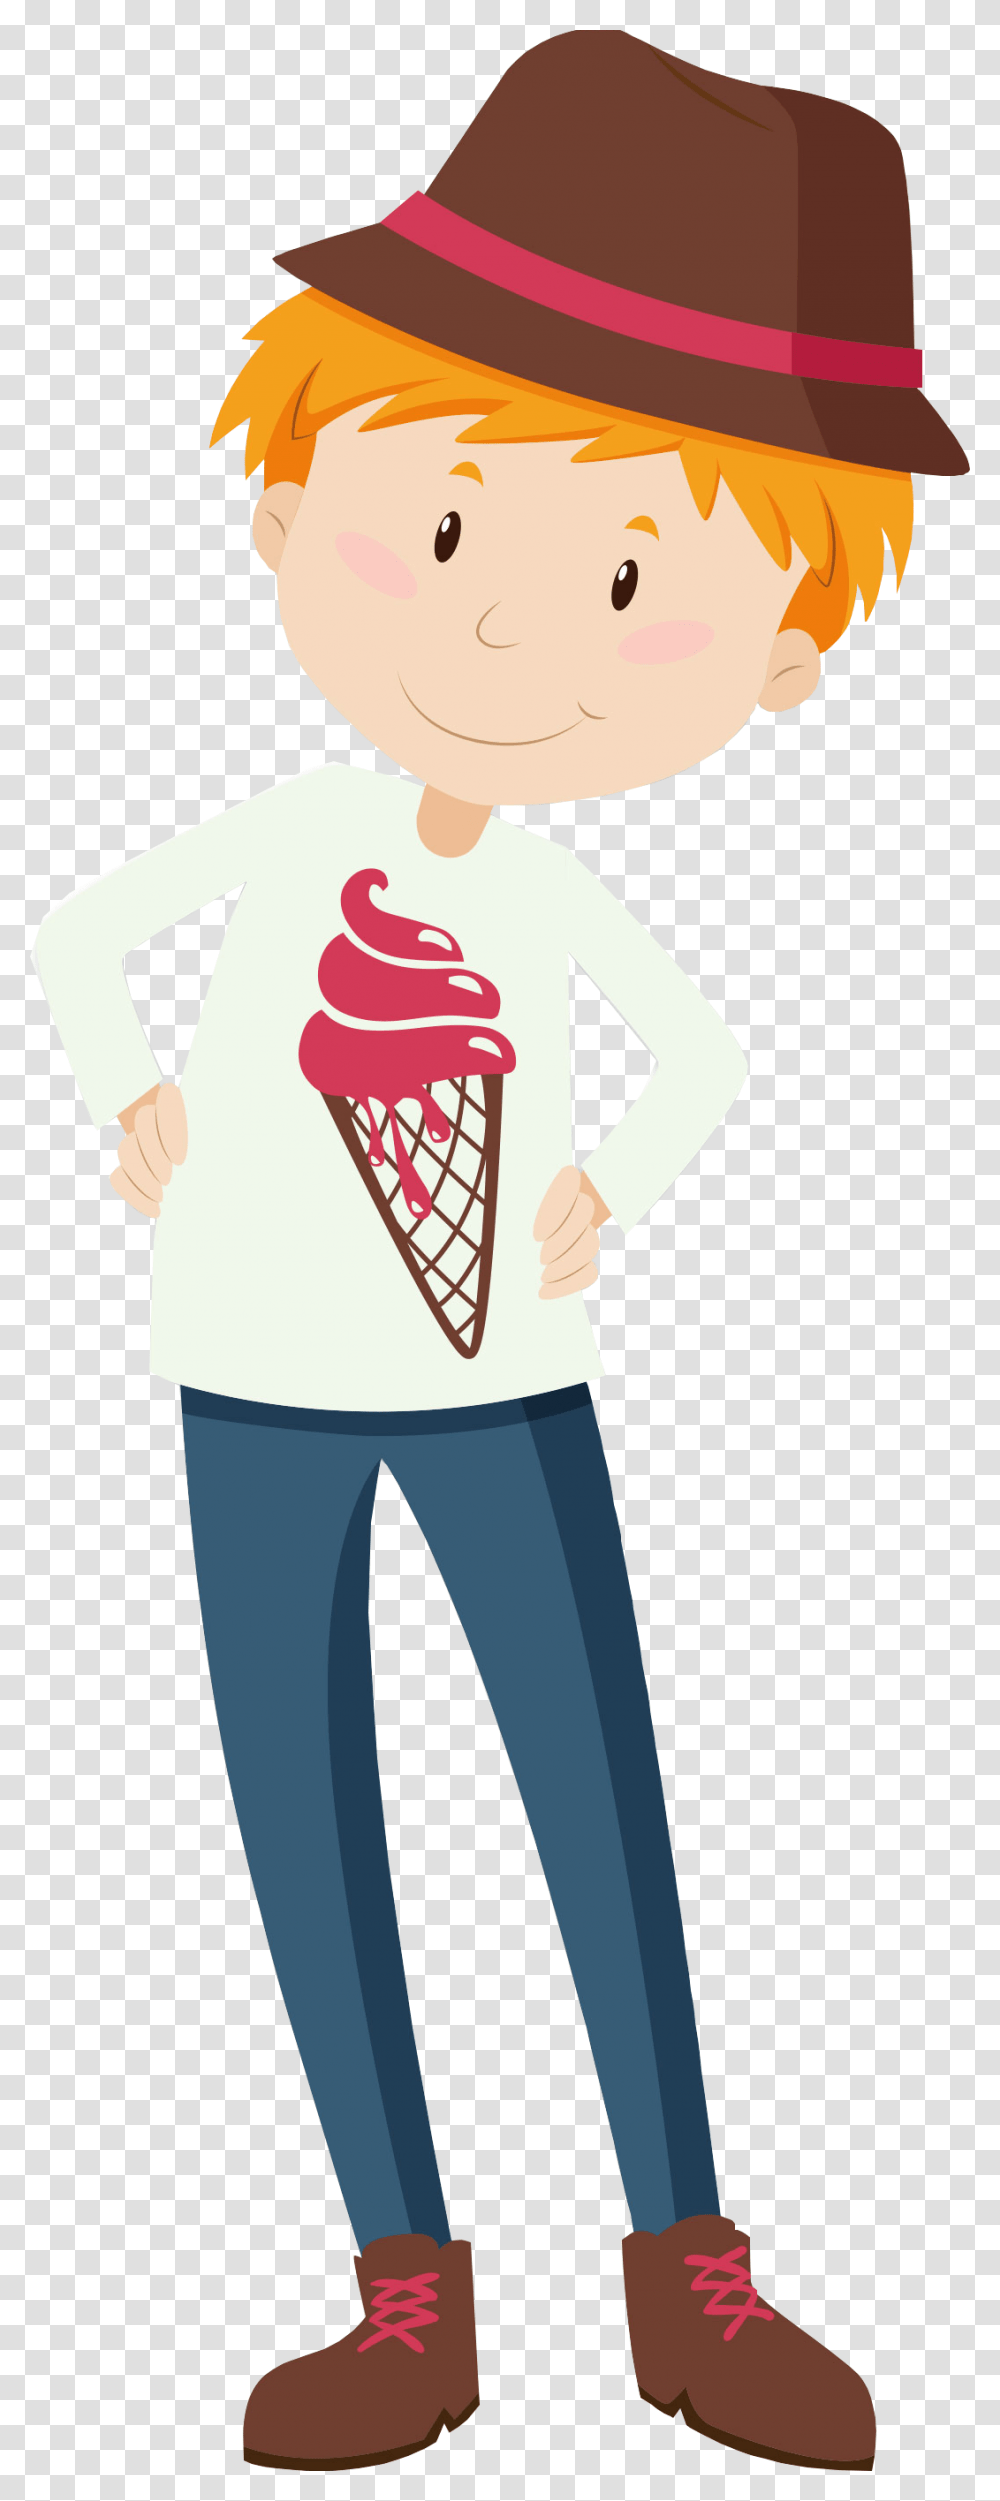 Cone Clipart Softy Tall And Short People Clipart, Bottle, Apparel, Person Transparent Png